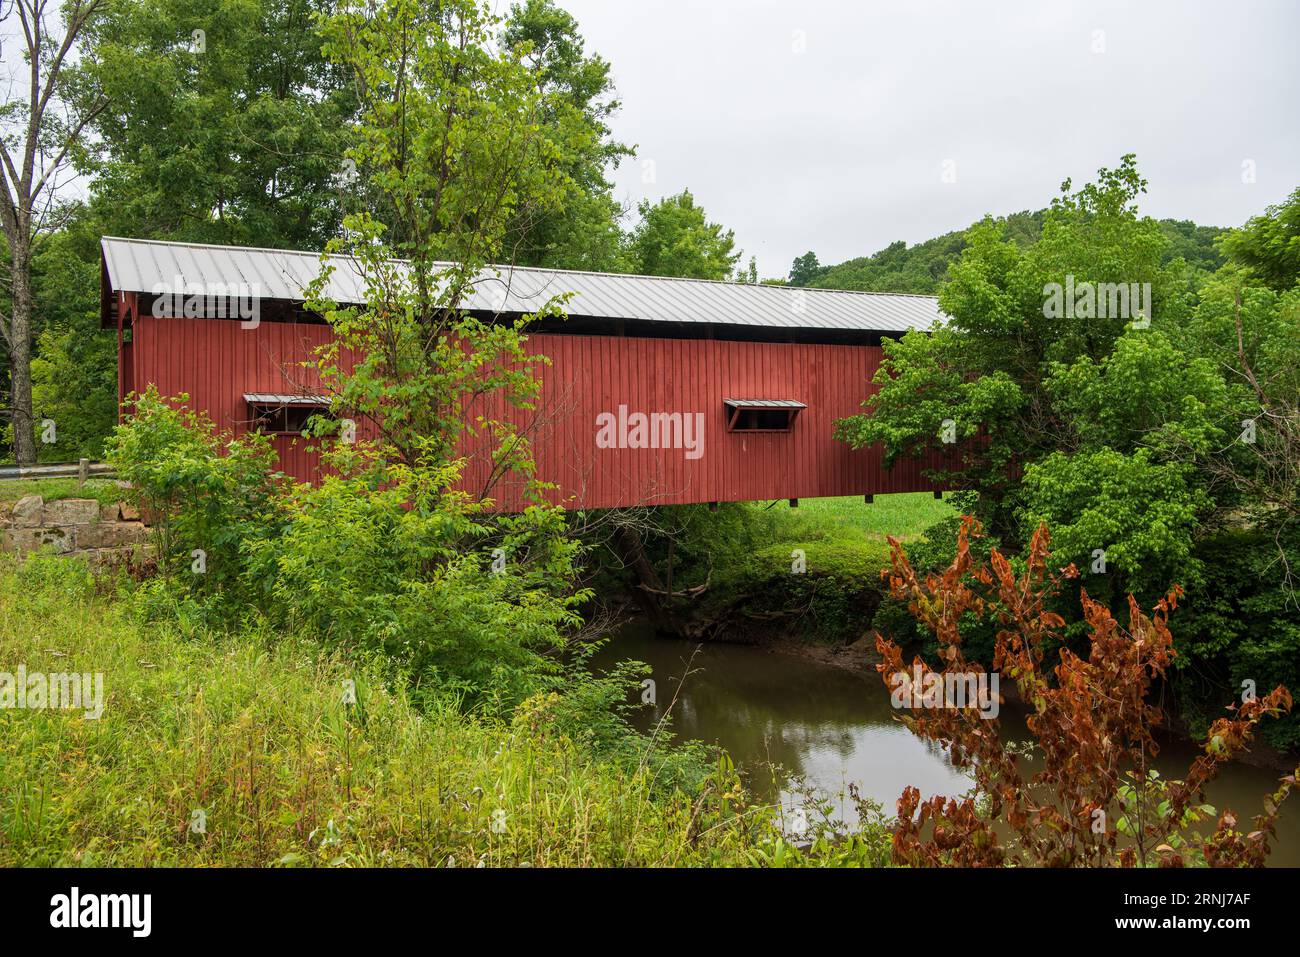 Bridge # 35-84-03 Shinn Covered Bridge was built in 1886 with a Burr Arch structure. It crosses the West Branch Wolf Creek on Palmer Road near Cutler Stock Photo